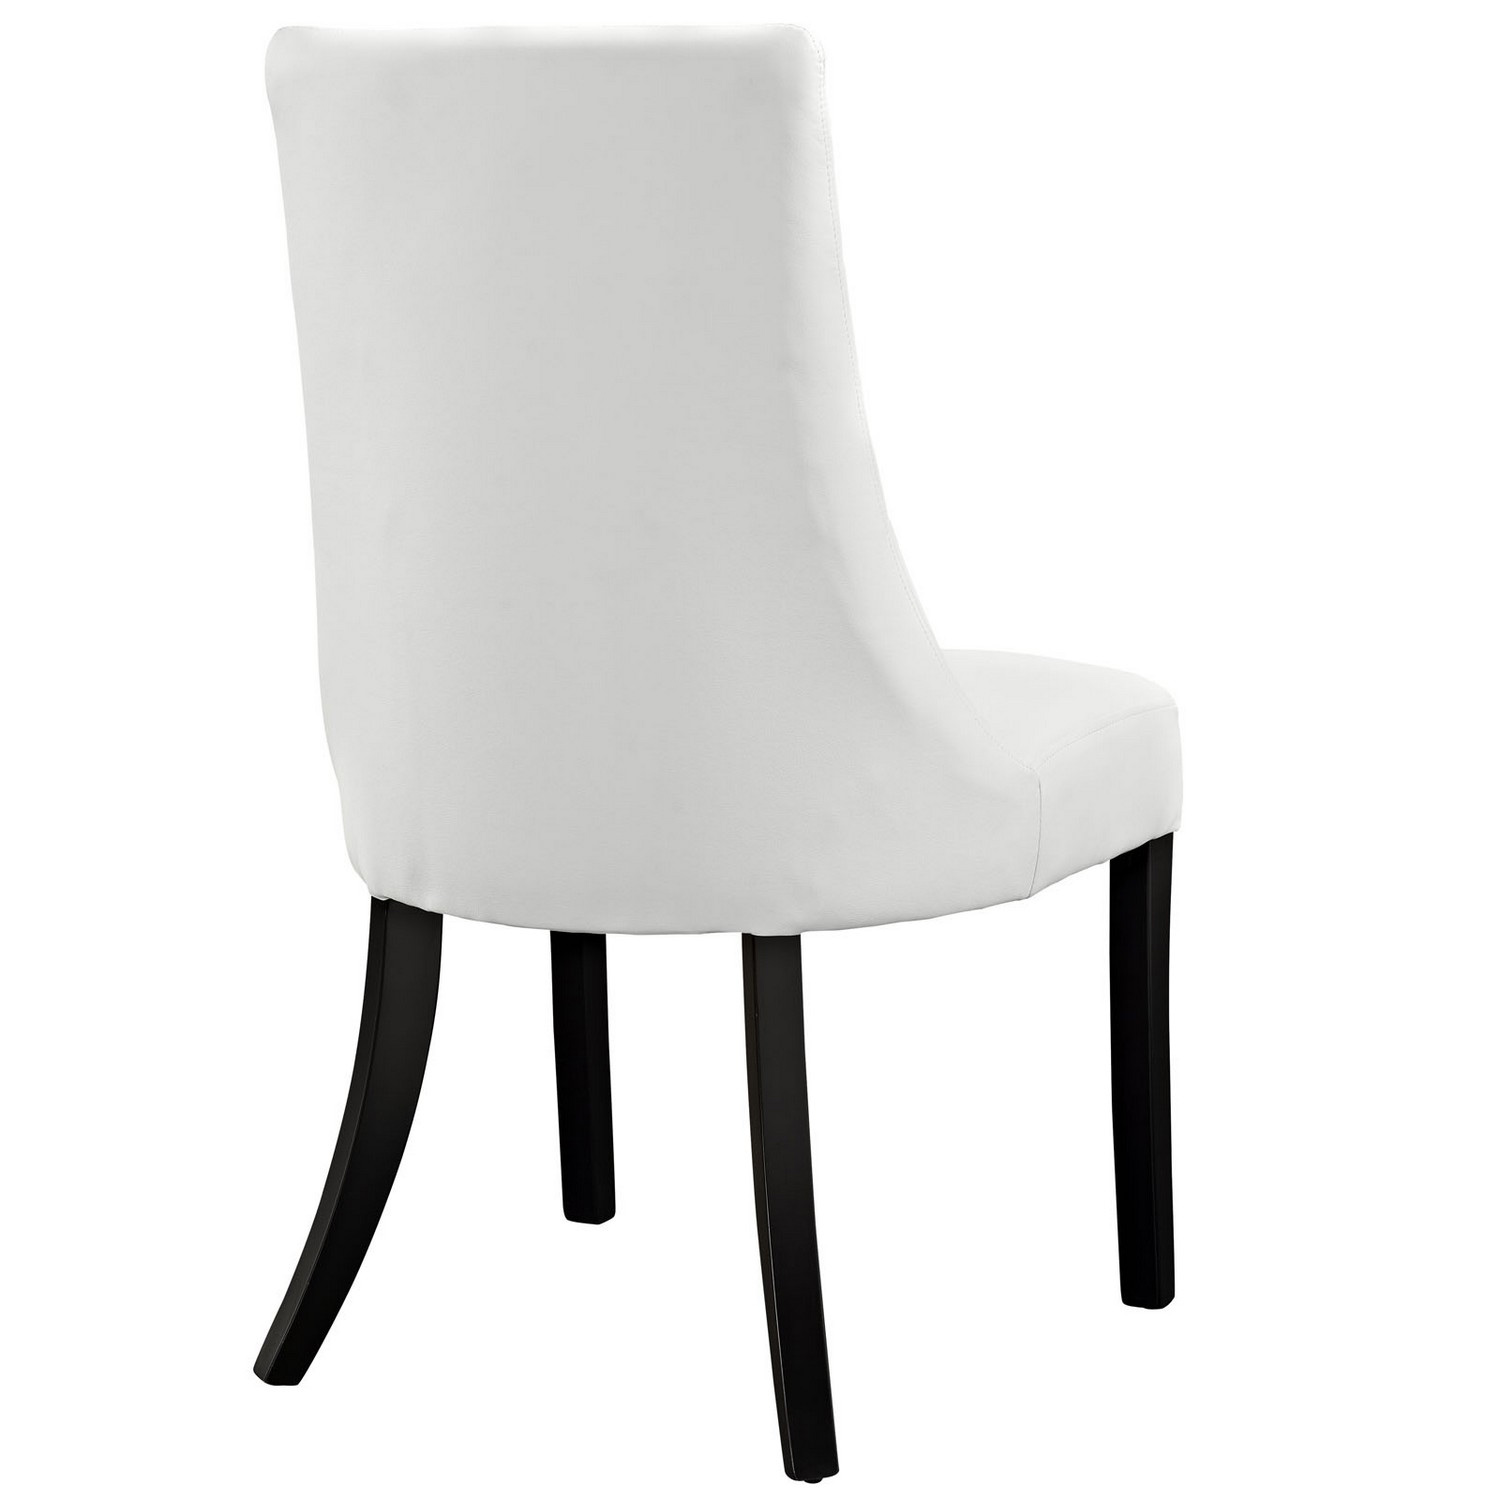 Modway Noblesse Vinyl Dining Chair Set of 4 - White